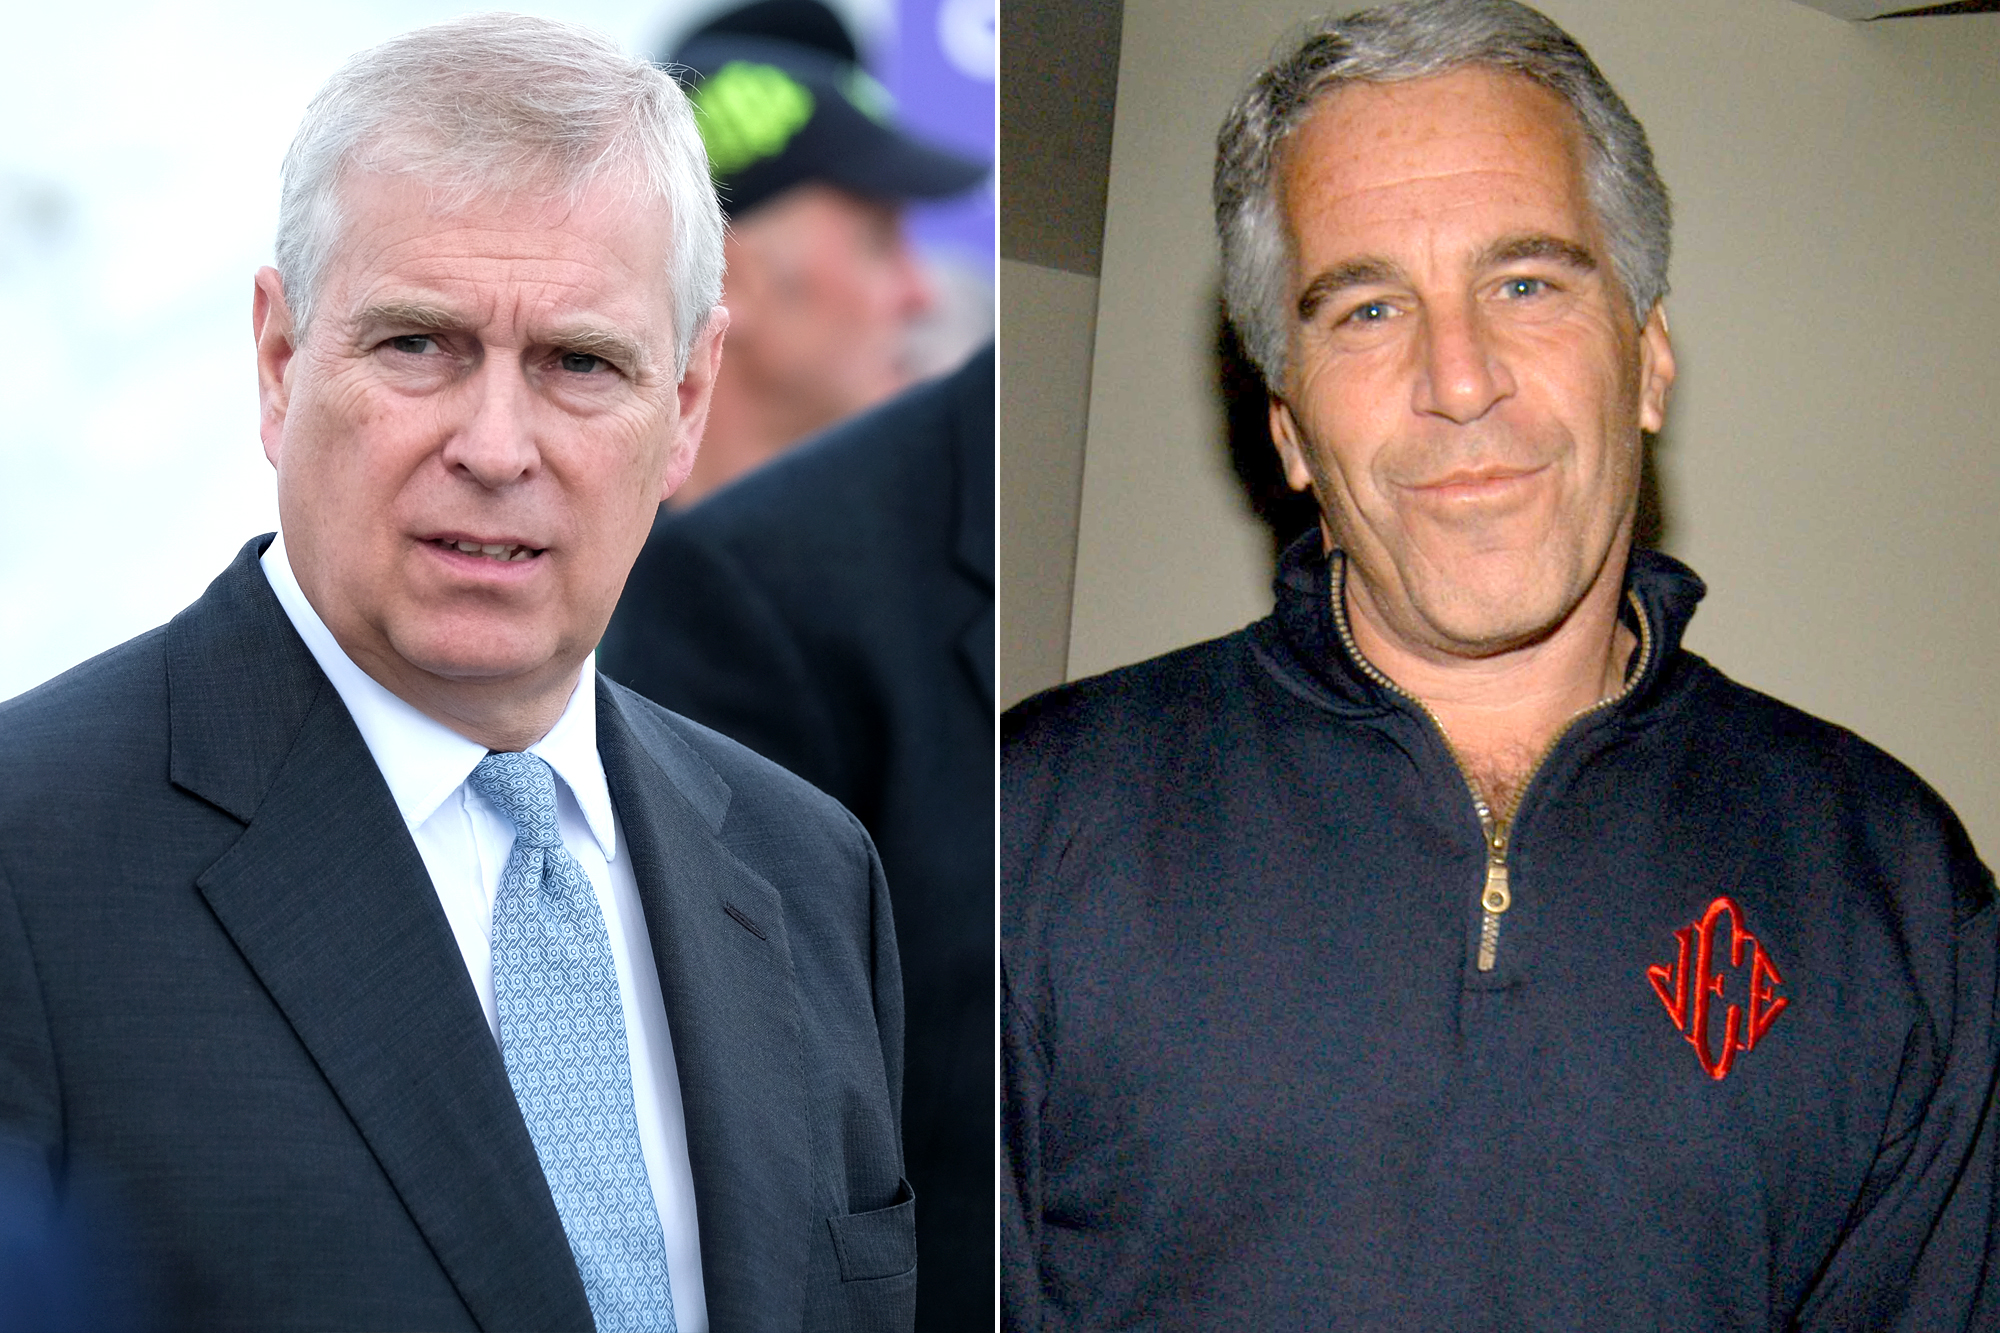 Prince Andrew denies witnessing anything ‘suspect’ during meetings with Jeffery Epstein